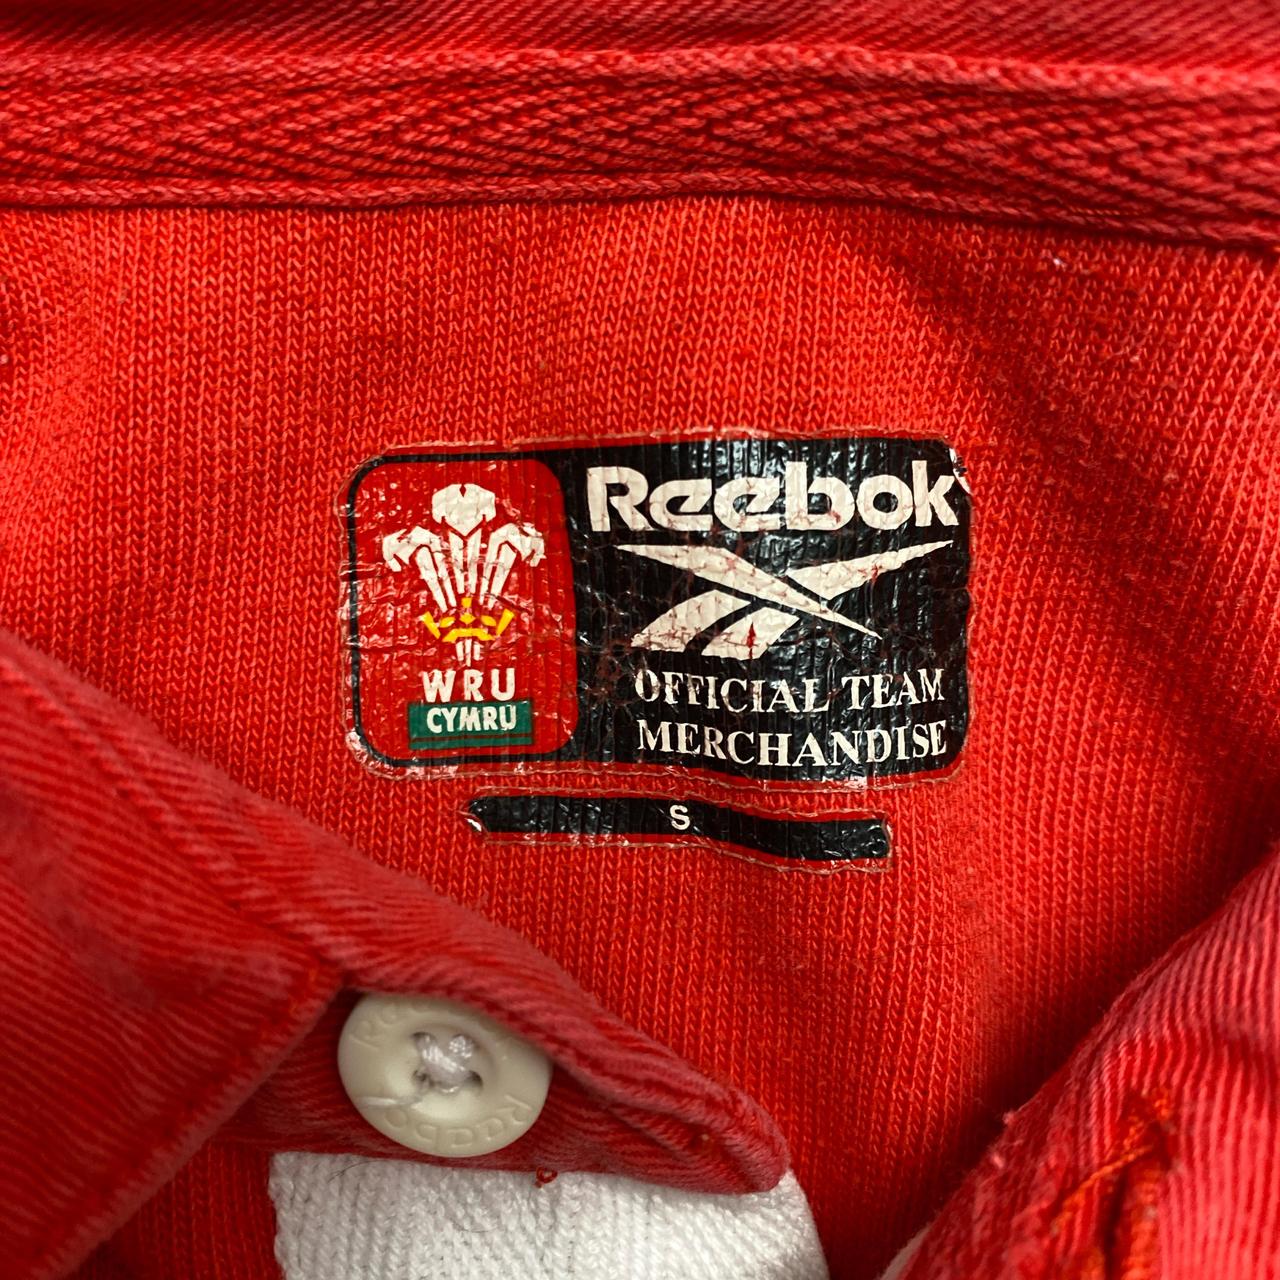 Wales Reebok Vintage Rugby Jersey Red and White